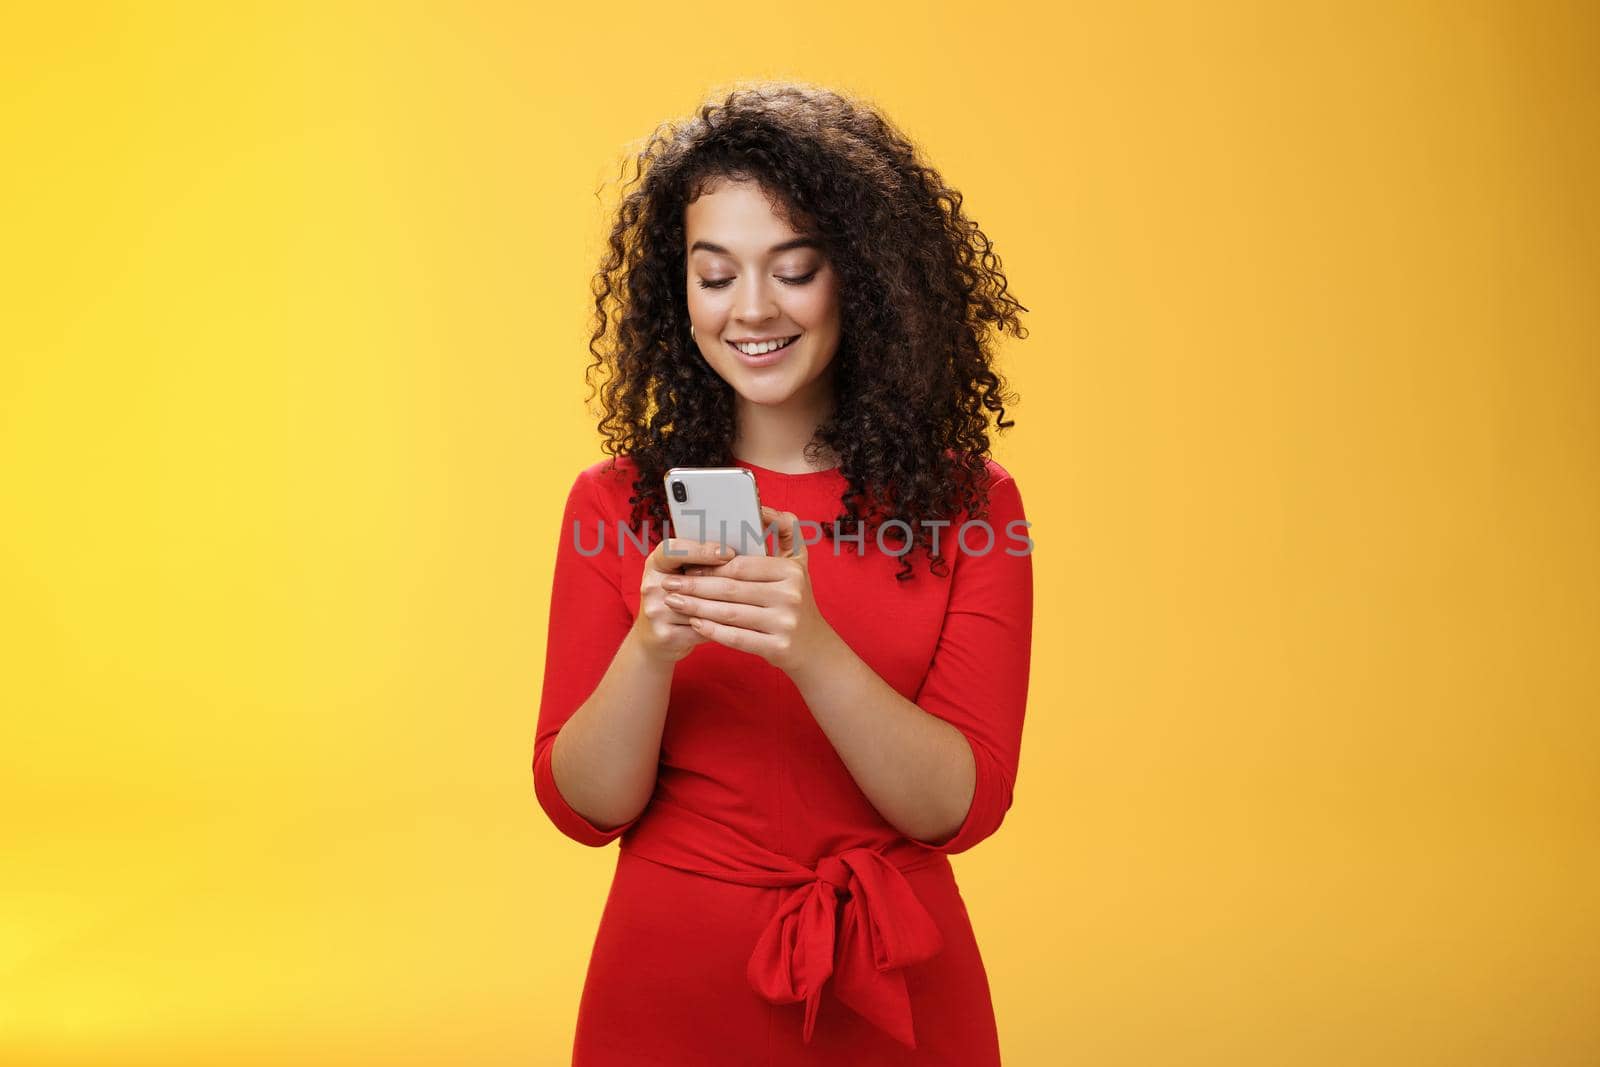 Gil sending message spread news across social network having party inviting friends via smartphone holding mobile phone in hands smiling broadly at device screen as posing over yellow background.